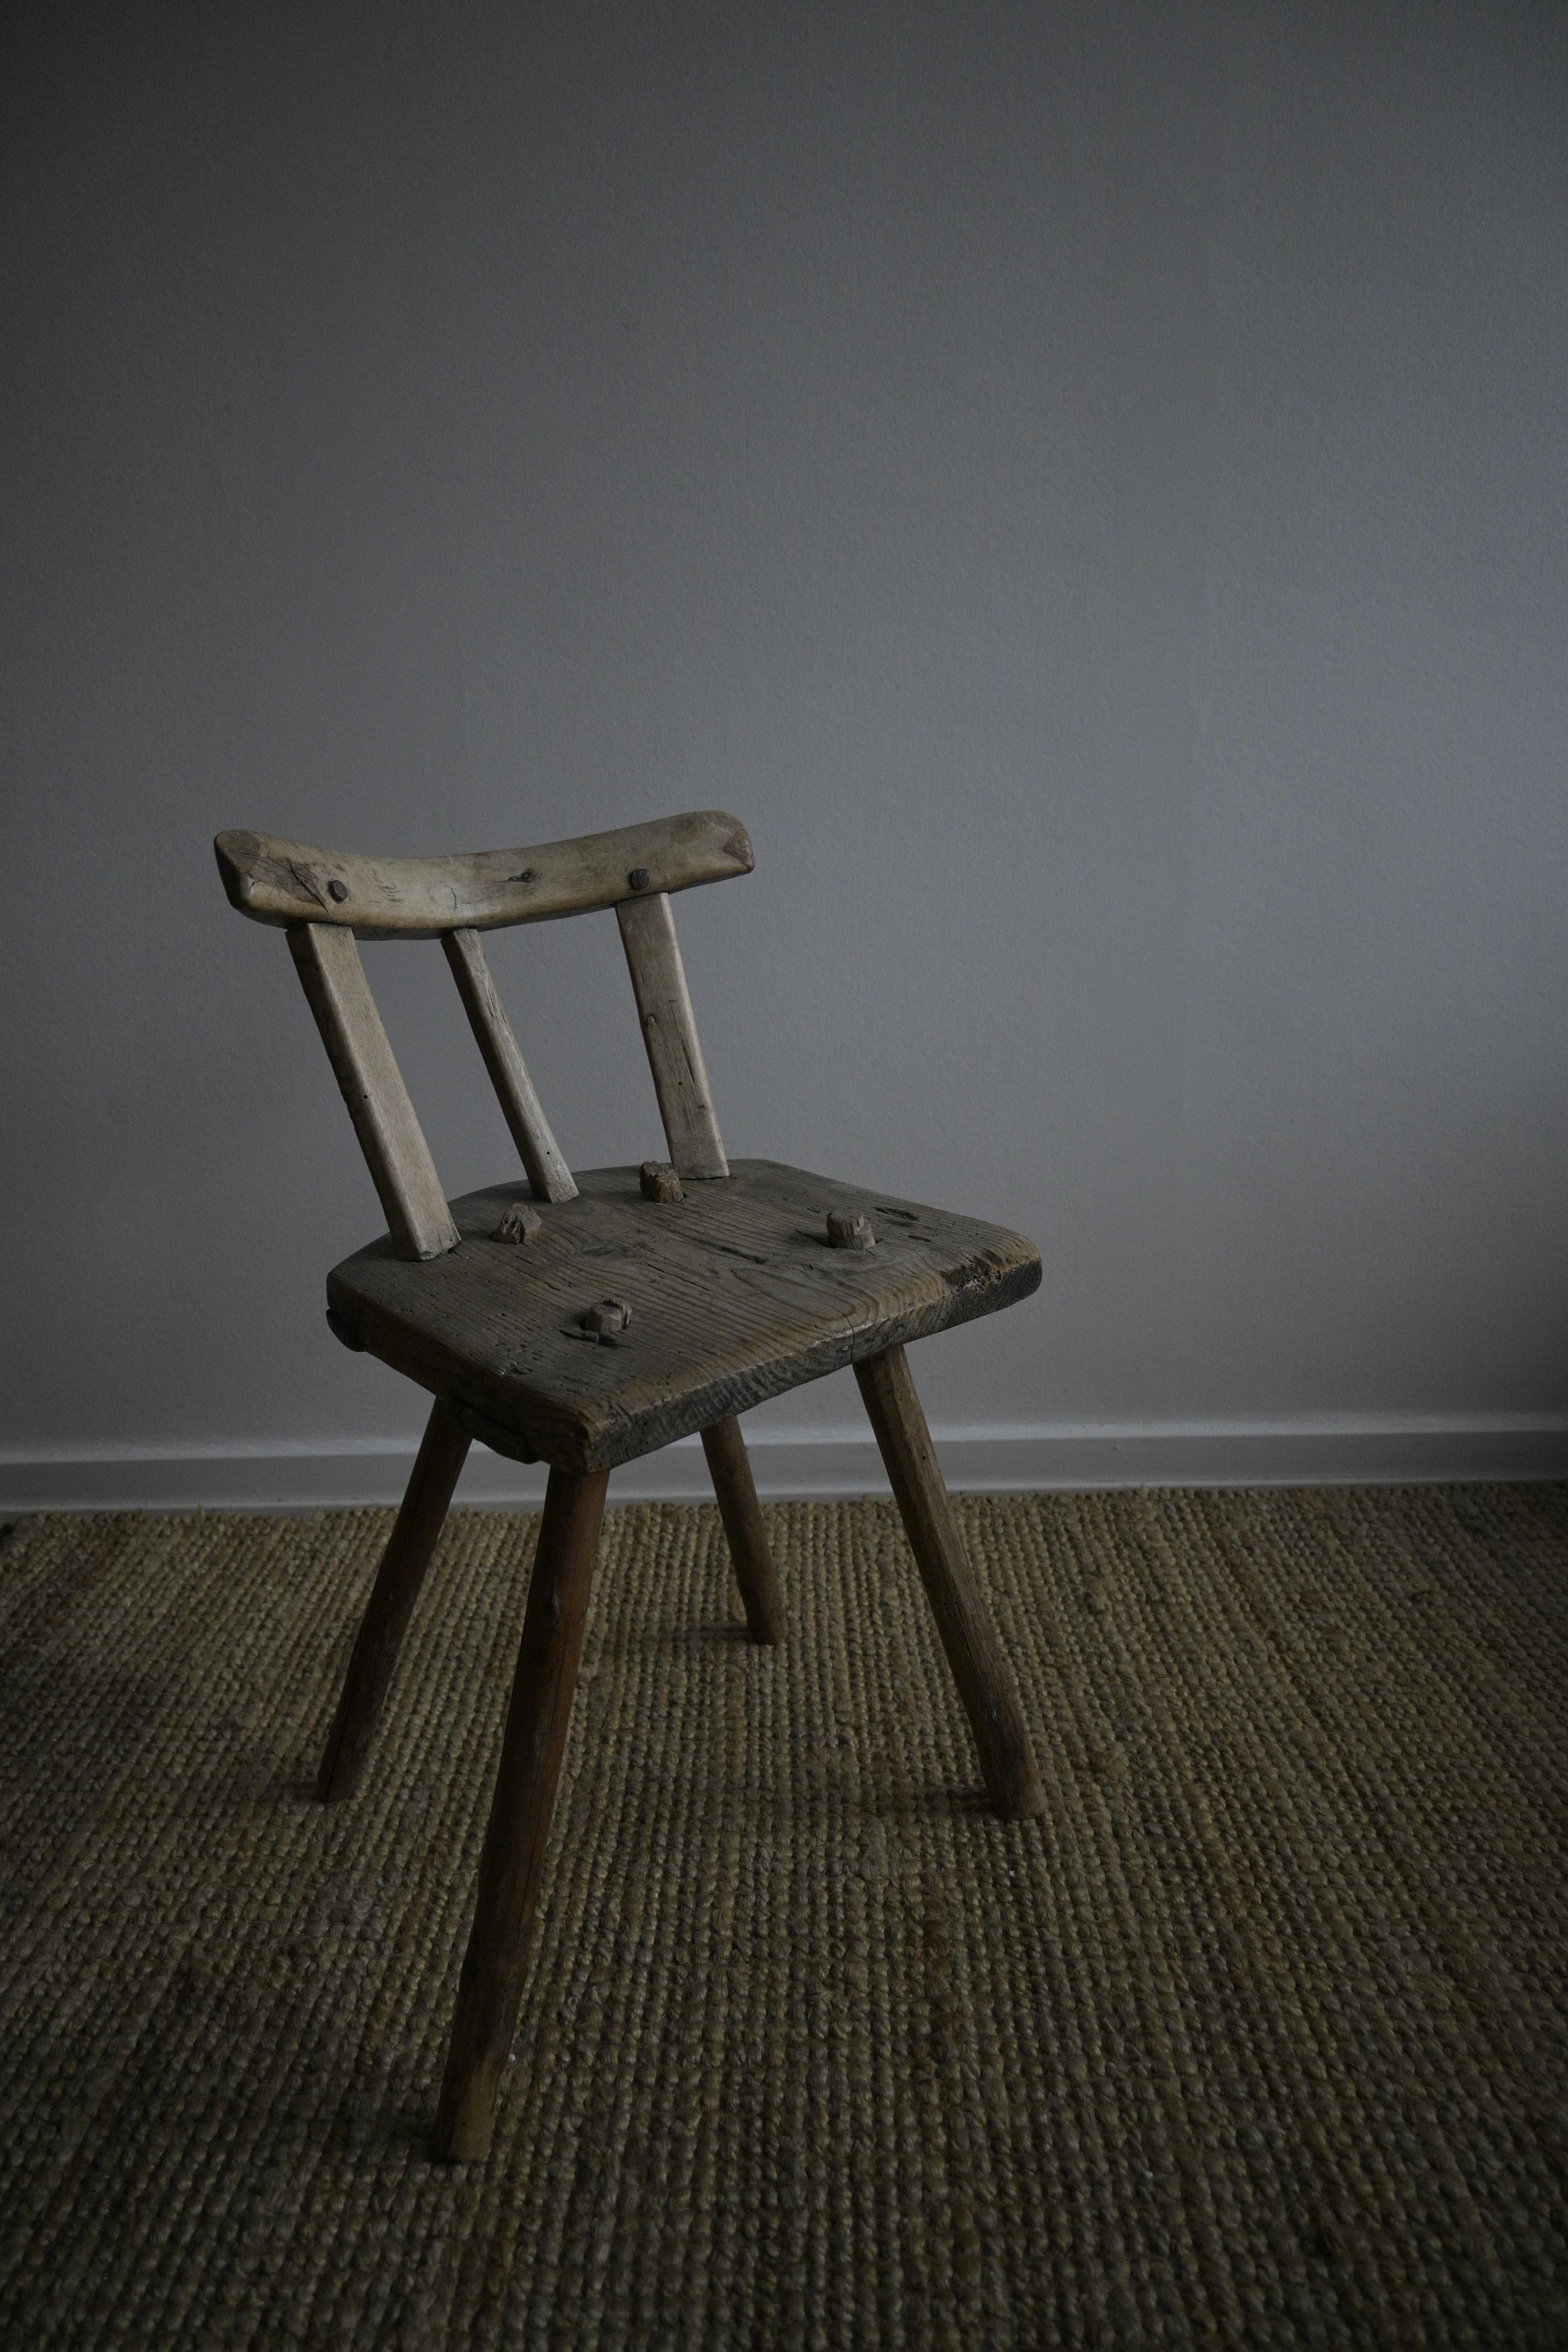 Primitive Swedish Child Stool early-18th century

Made of Pine wood and the backrest is made of birch wood.
Beautiful patina and smooth surface, wear consistent with age and use.

Height: 55cm /21.6 inch
Width: 30 cm /11.8 inch
Depth: 28 cm /11